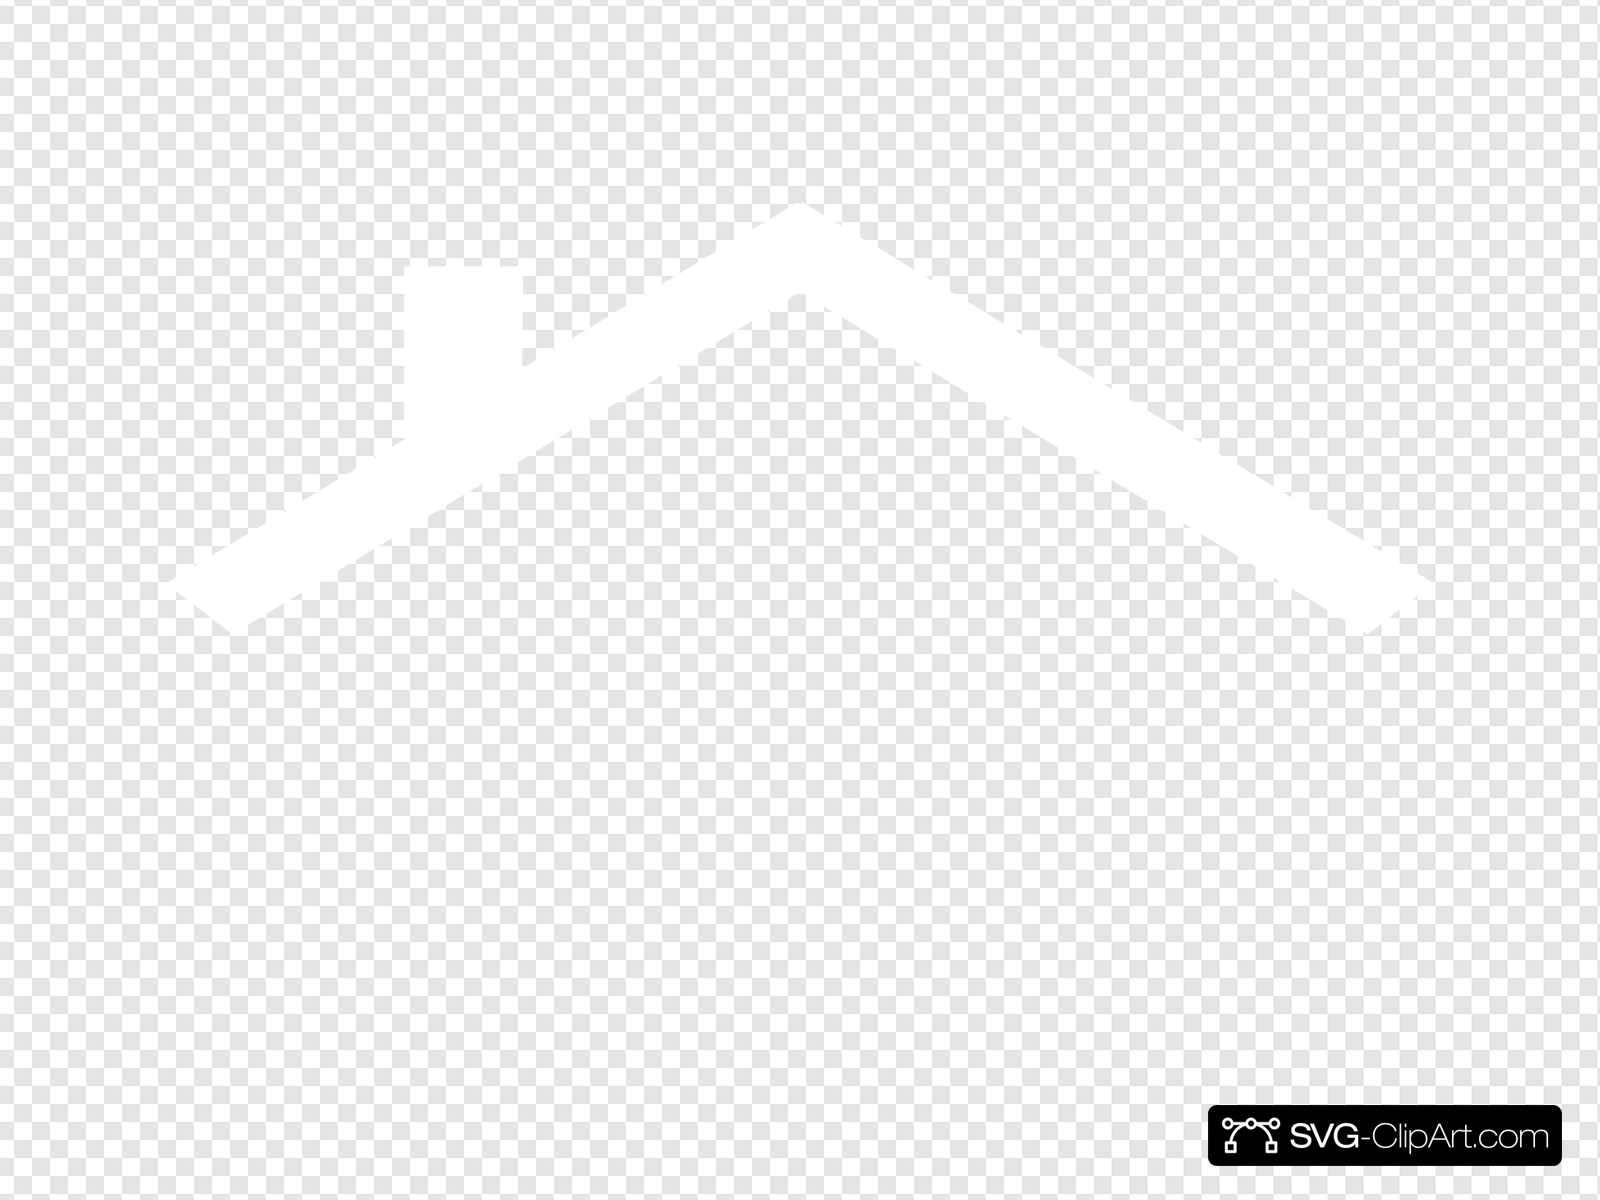 House Roof White Clip art, Icon and SVG